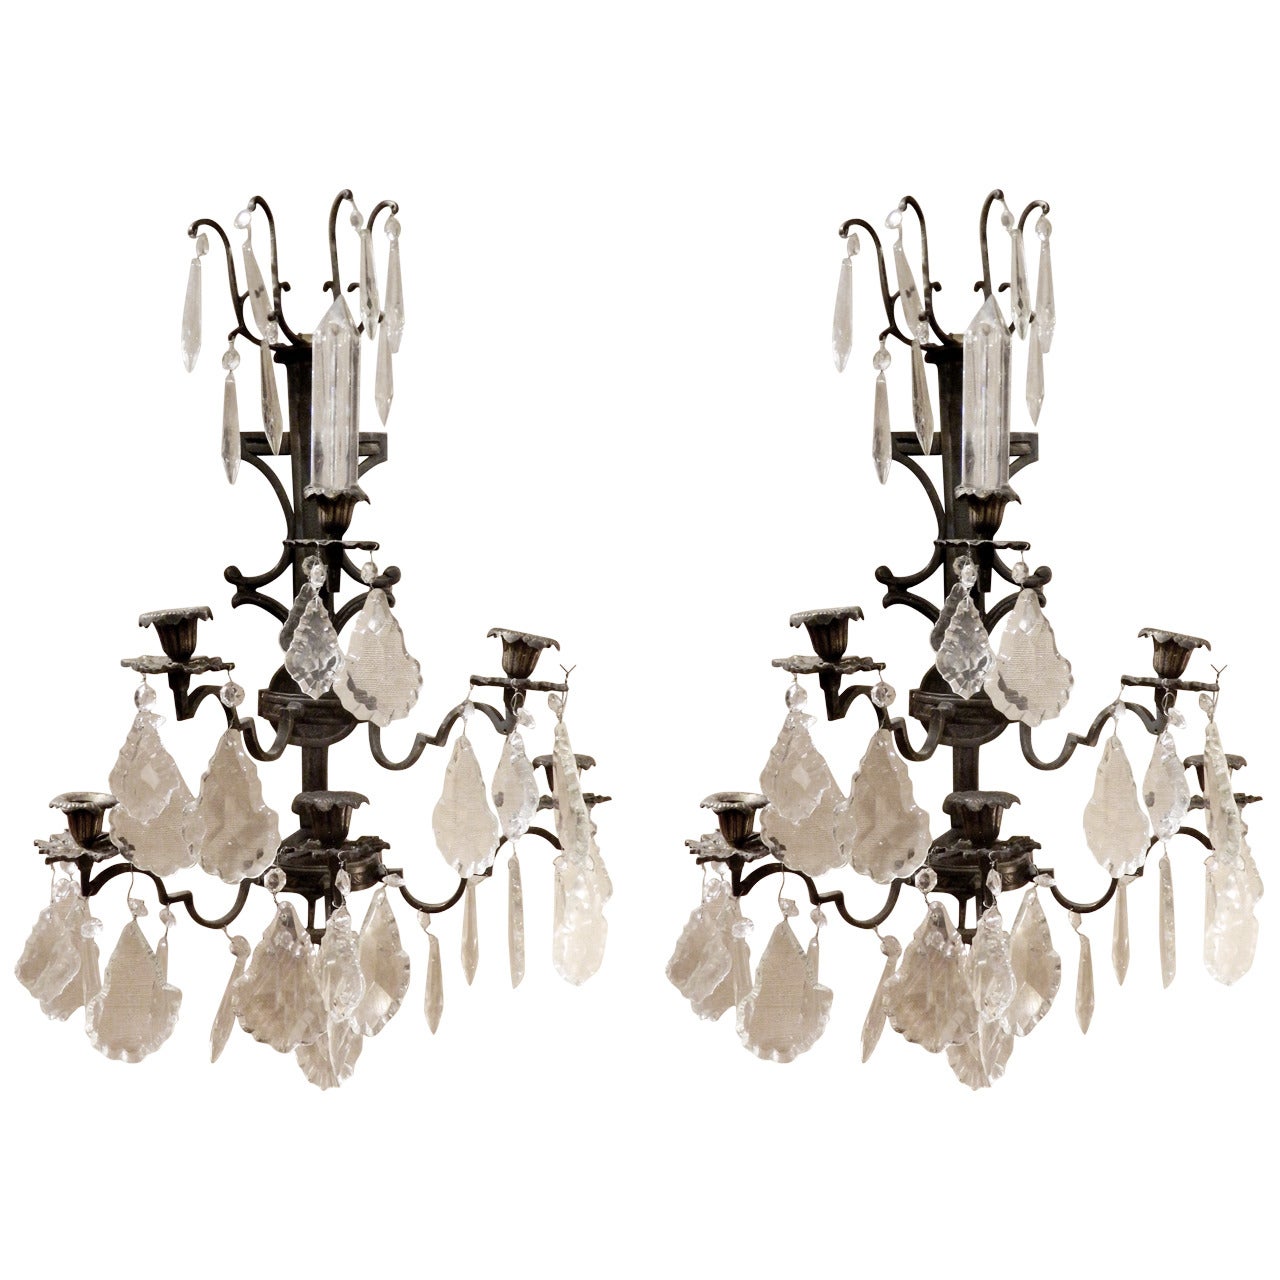 Pair of Spanish Iron and Crystal Five-Light Wall Sconces, 19th Century